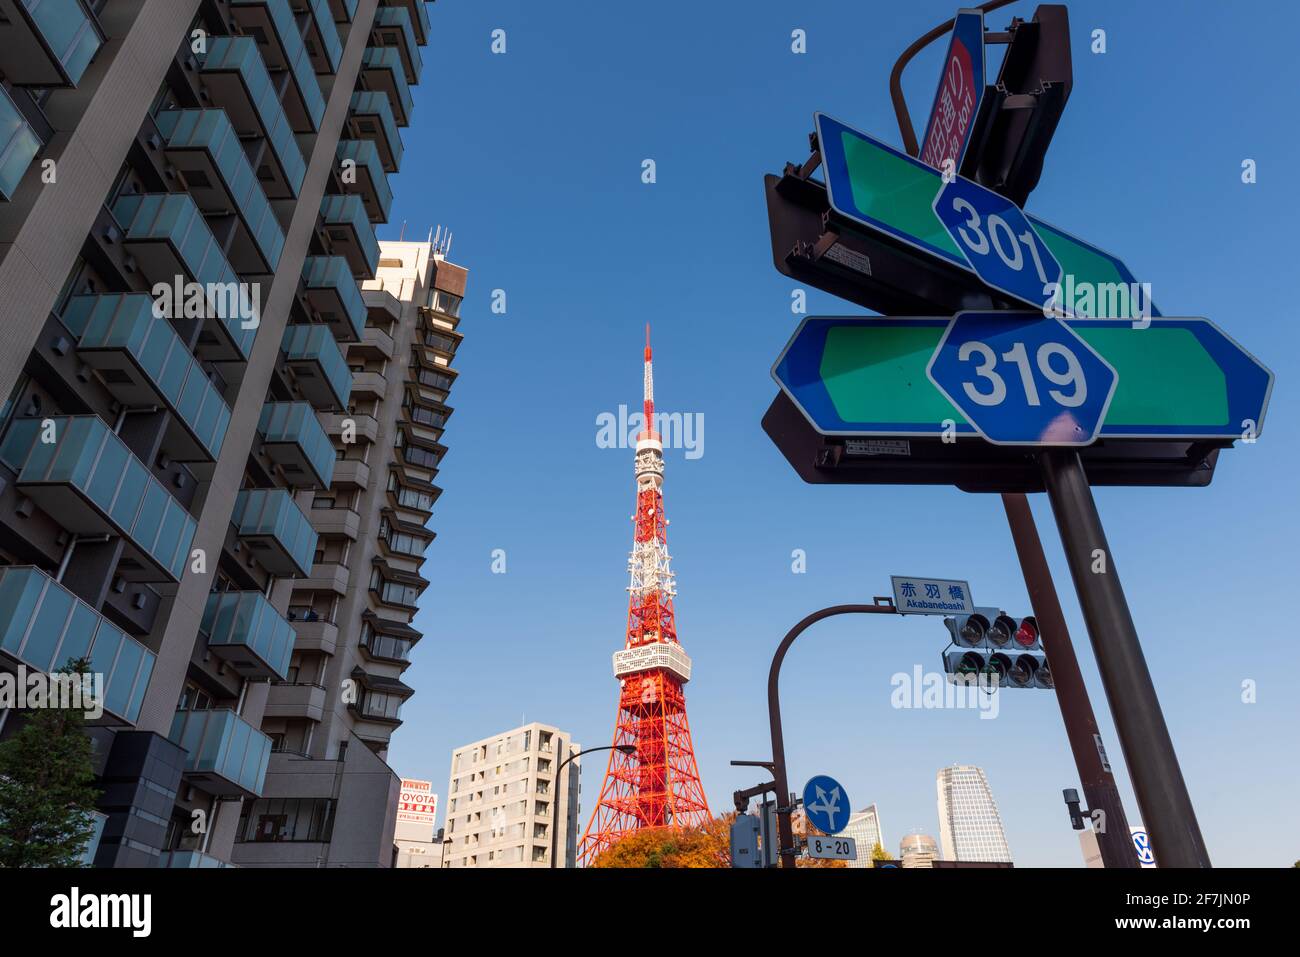 Tokyo, Japan - December 09, 2015: Tokyo Tower viewd from a residential area. Stock Photo